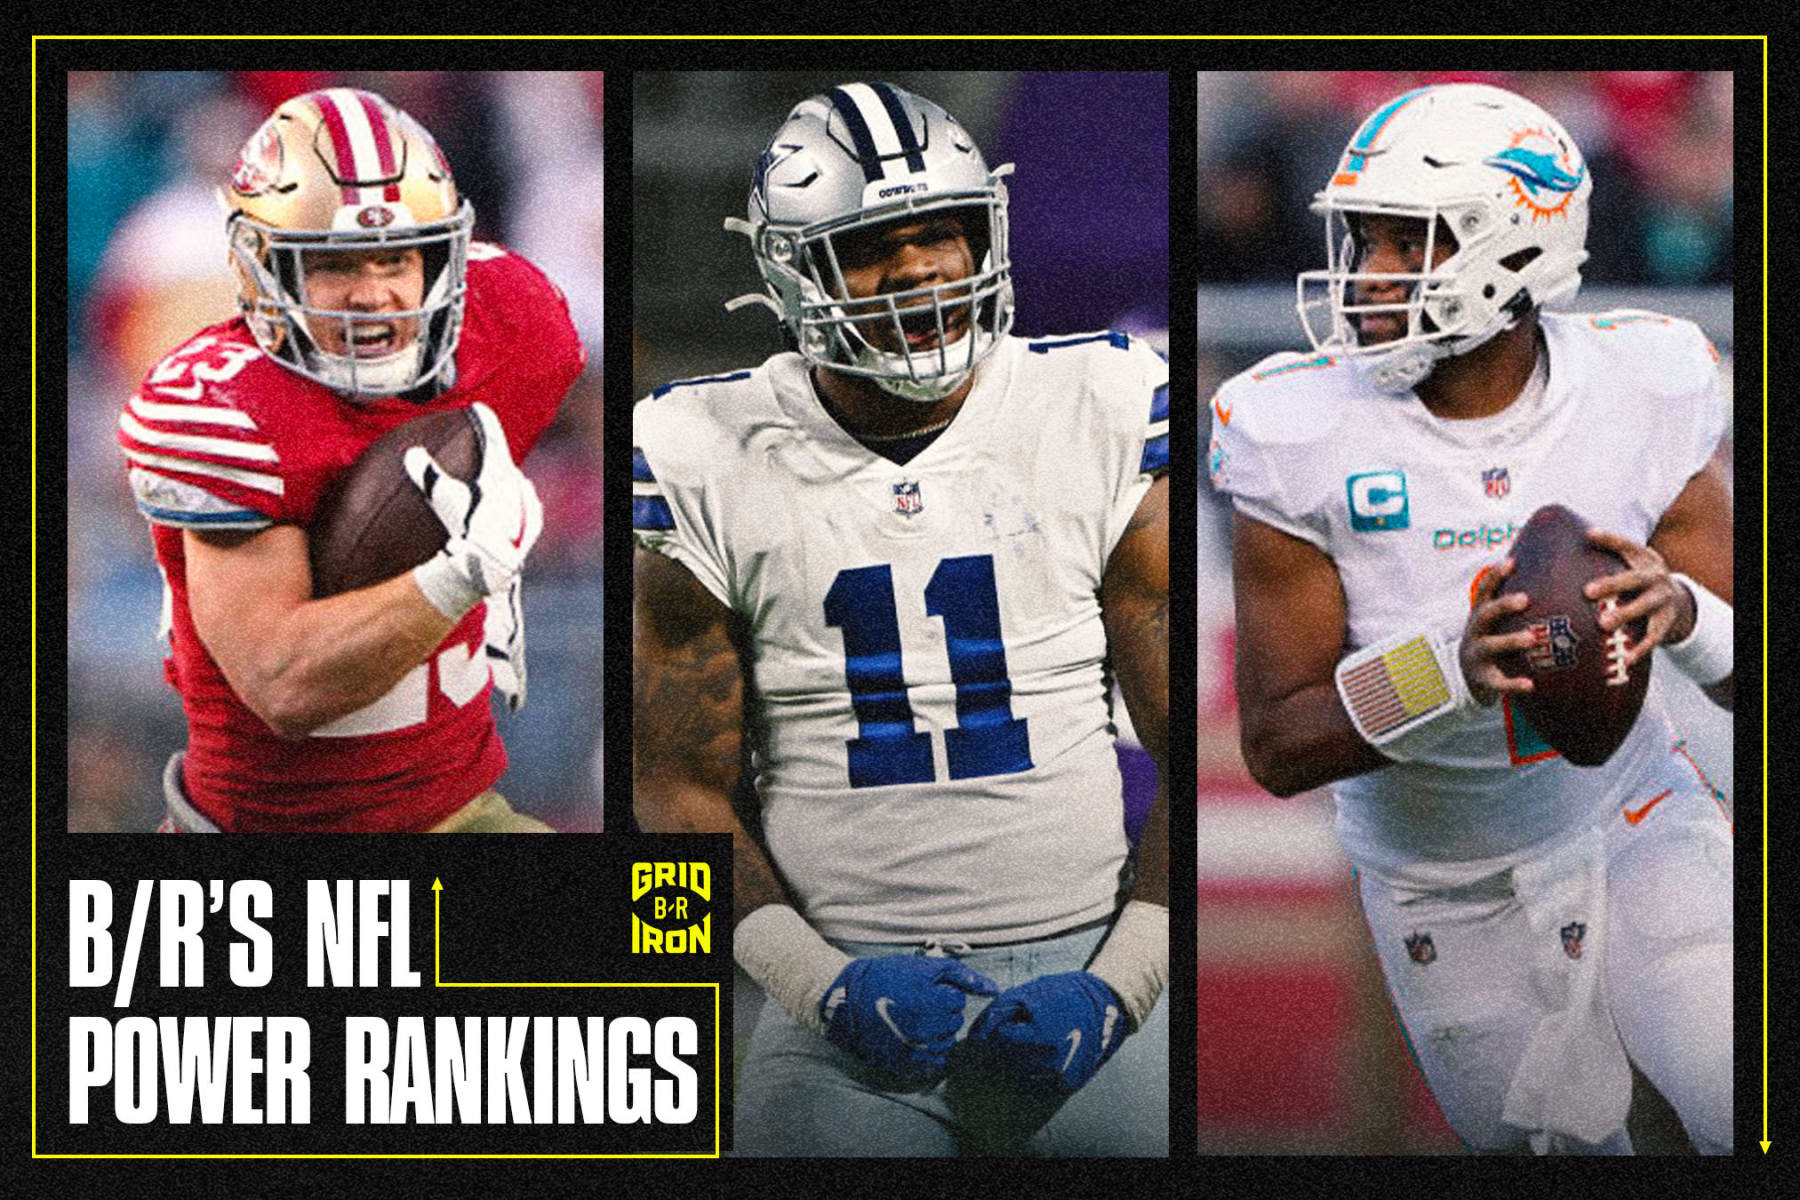 NFL Power Rankings - Week 3: Cowboys rise to top, Bears bottom out